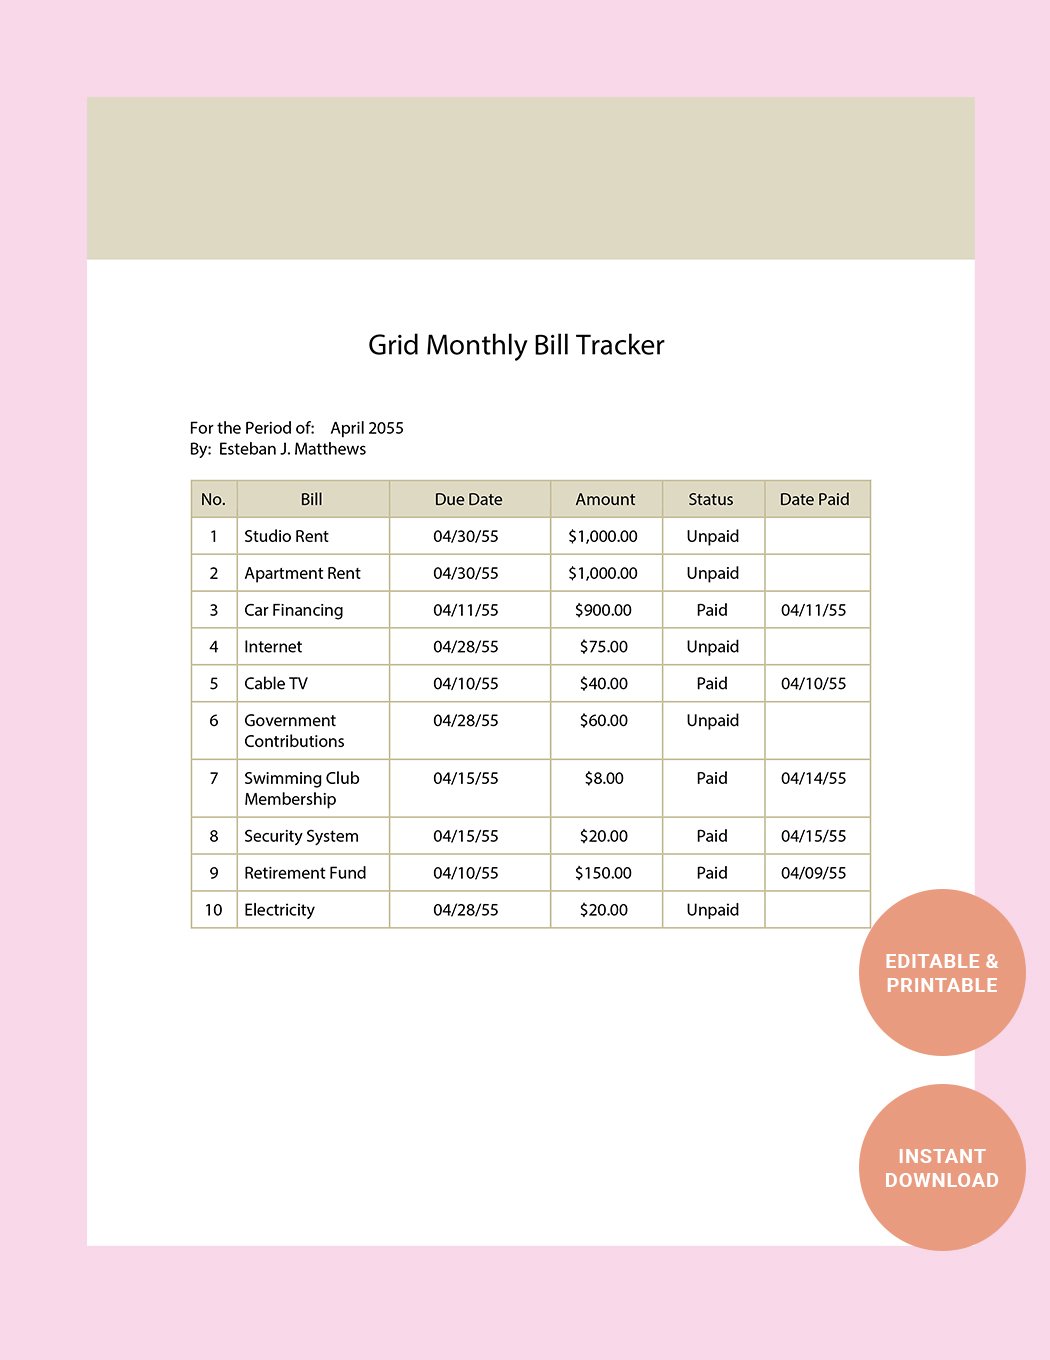 Free Grid Monthly Bill Tracker Template in Word, Google Docs